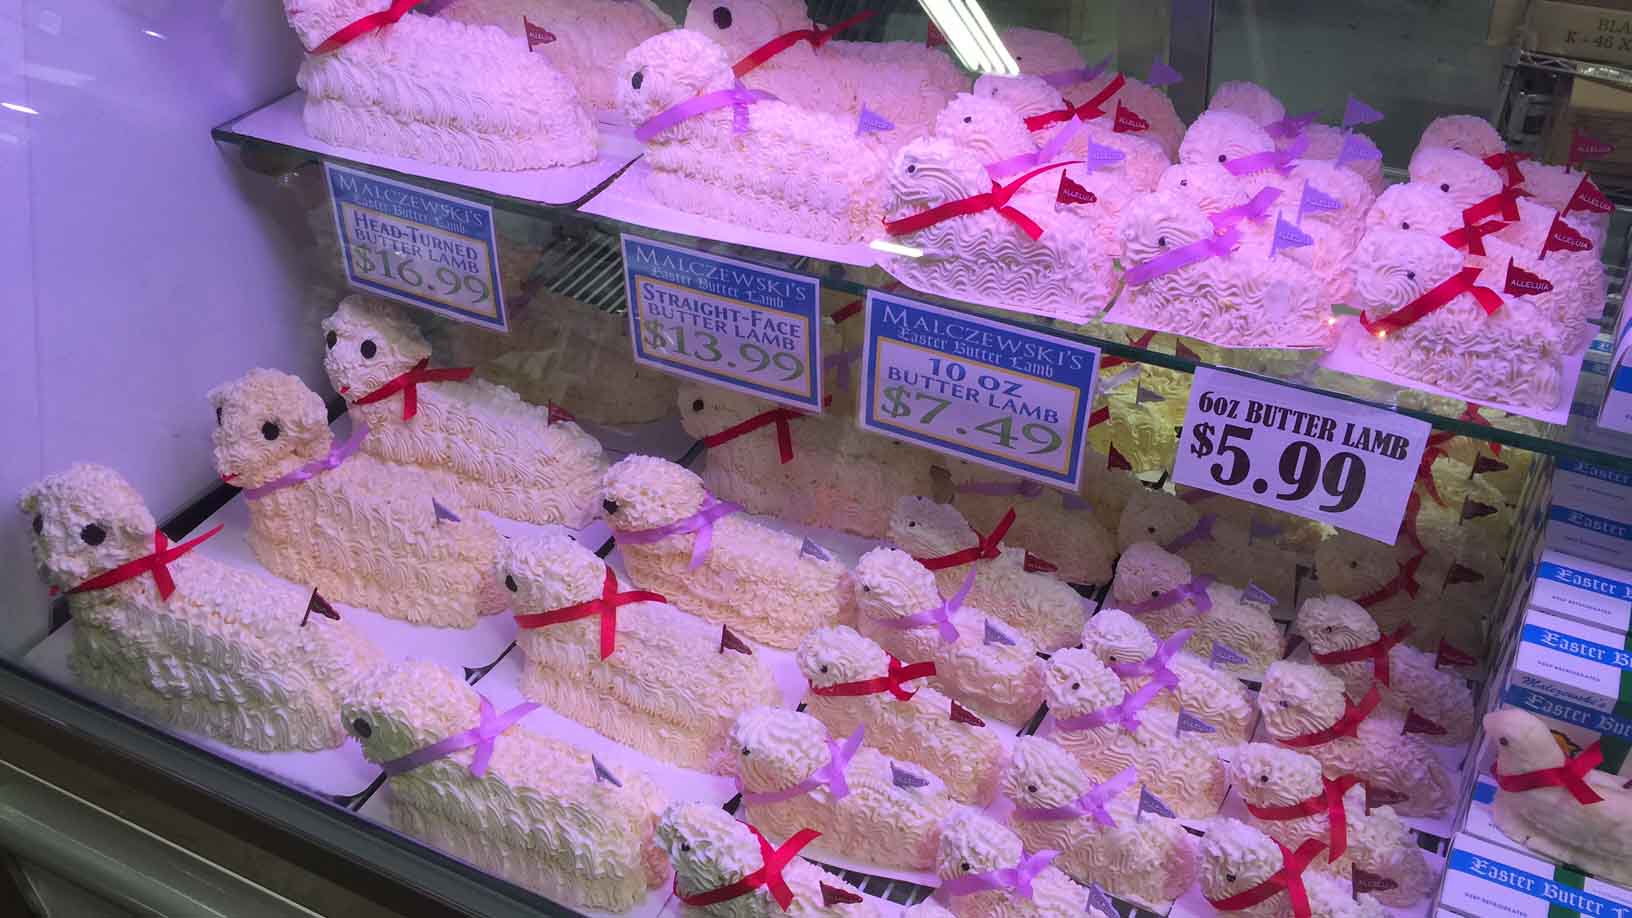 A display case showing an assortment of butter lambs at Malczewski's, a popular shop in Buffalo.